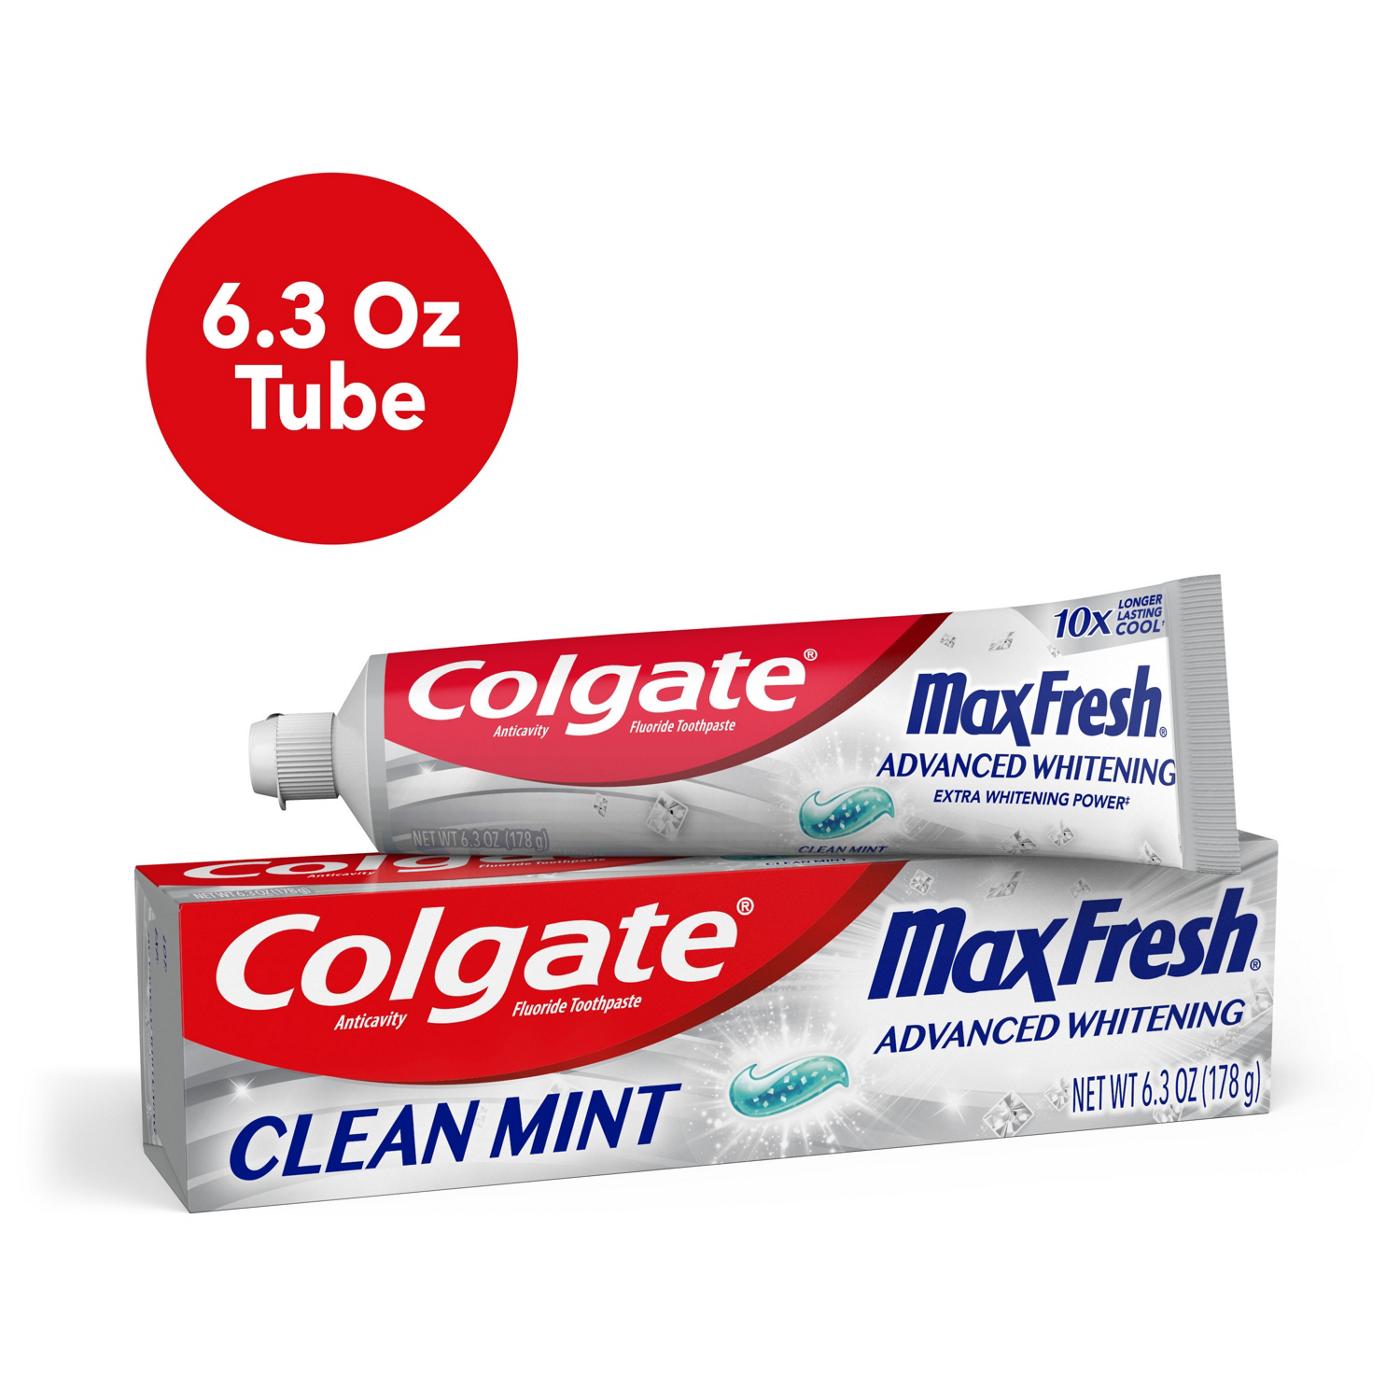 Colgate Max Fresh Anticavity Toothpaste - Clean Mint; image 8 of 10